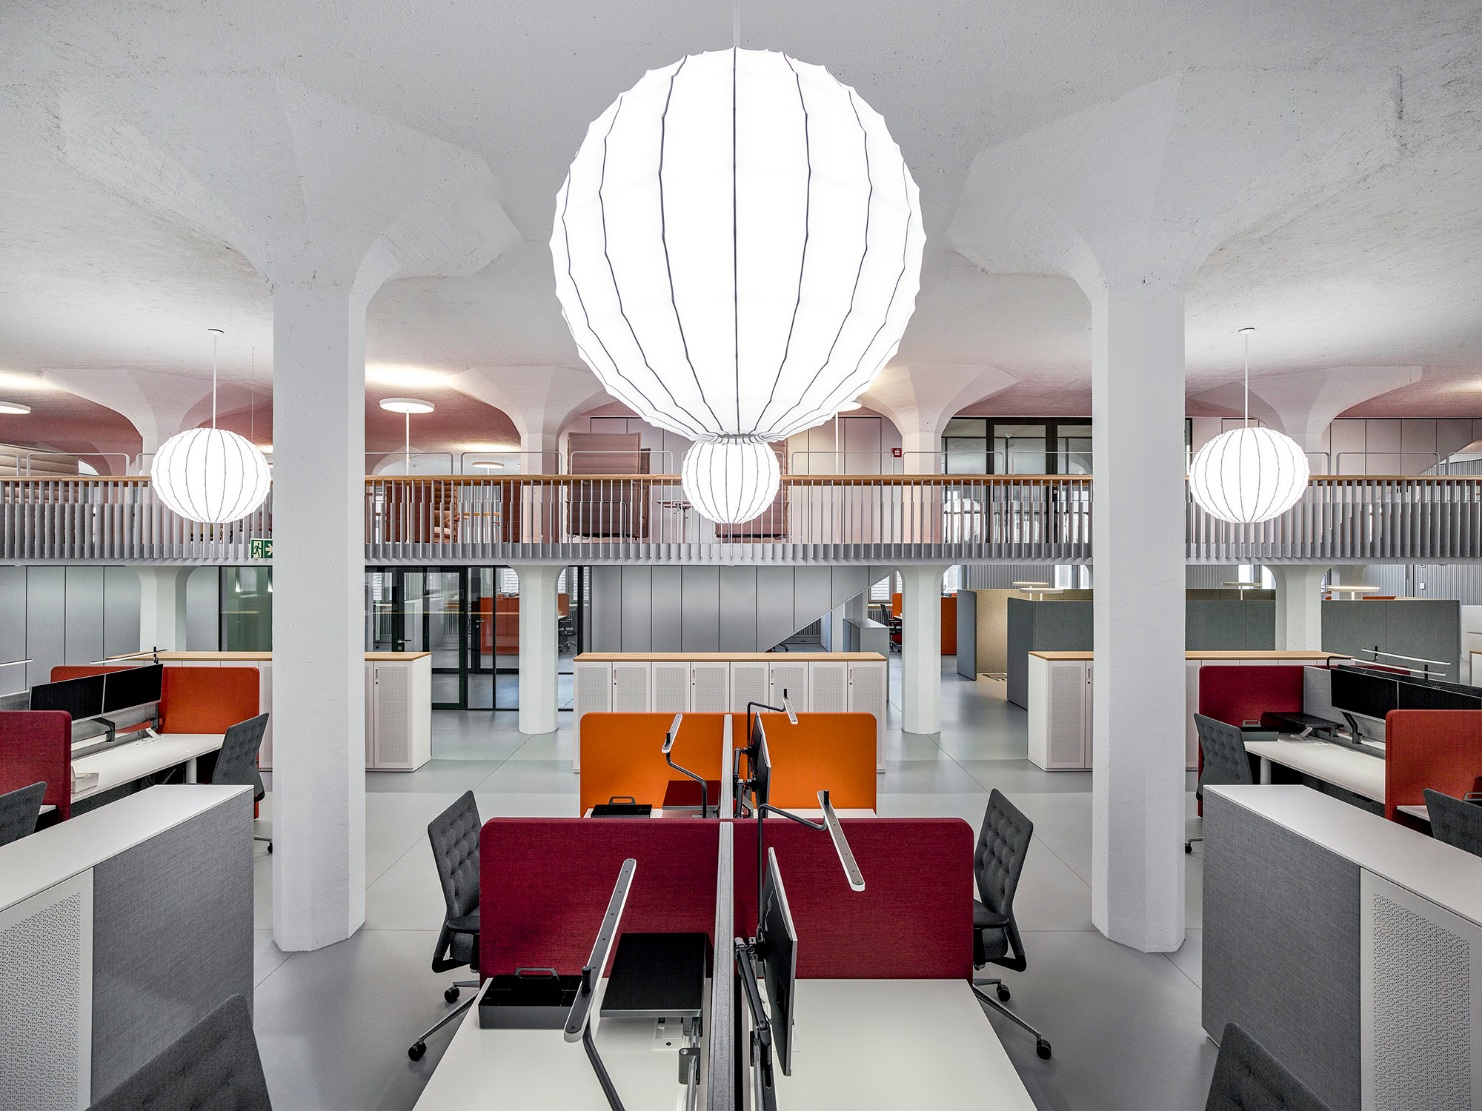 View of the office spaces with their light and modern interiors